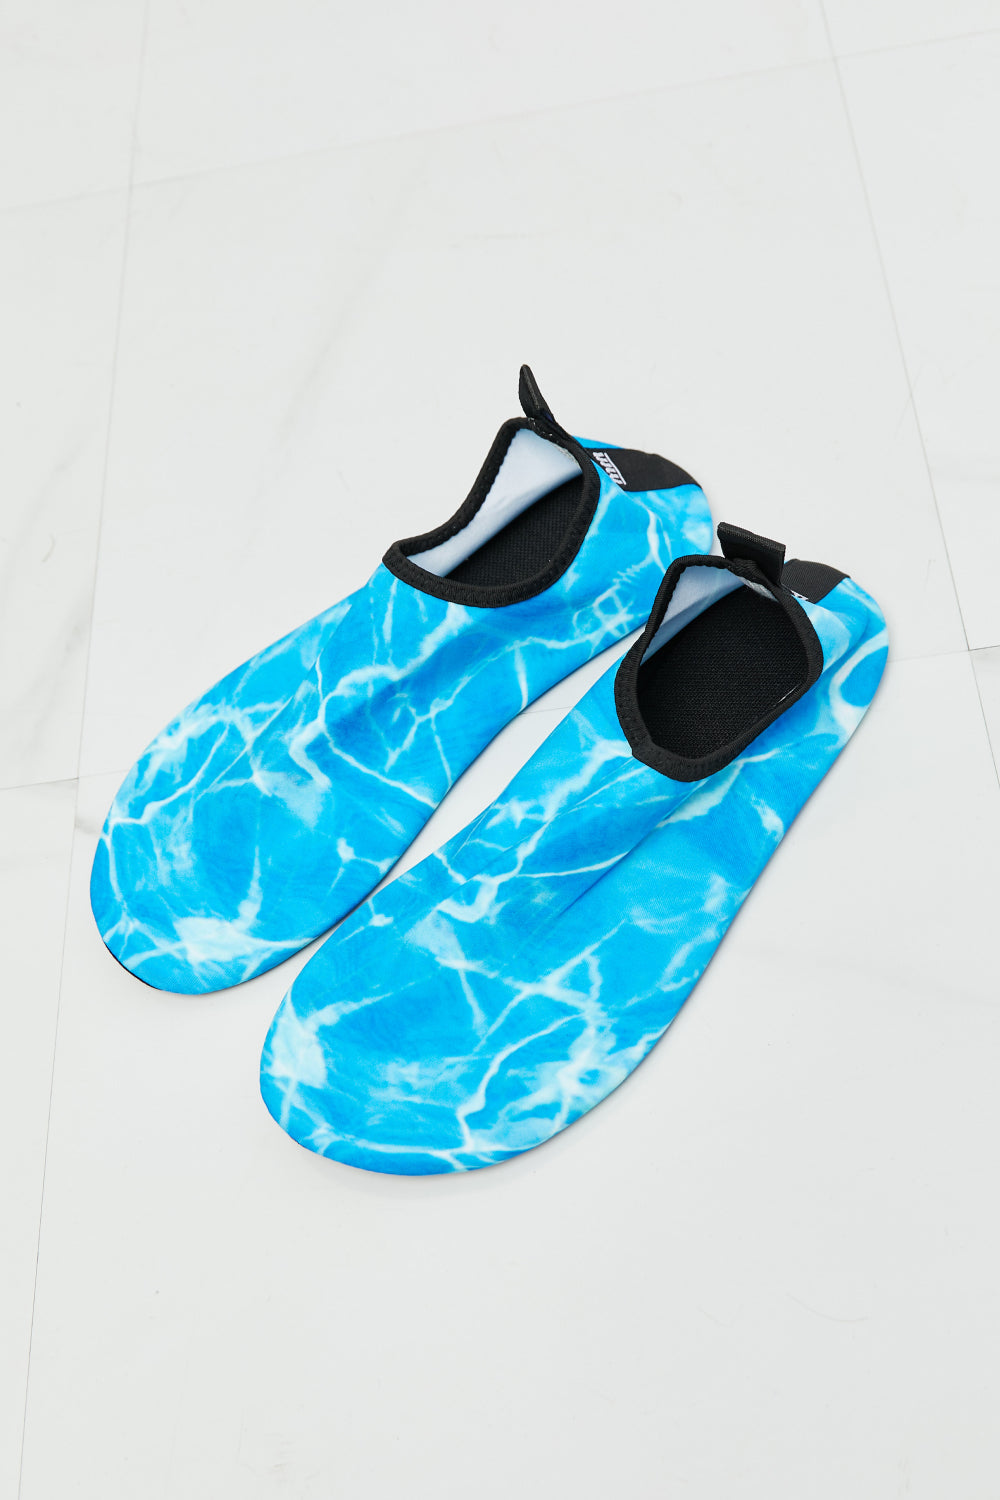 MMshoes On The Shore Water Shoes in Sky Blue - Sun of the Beach Boutique